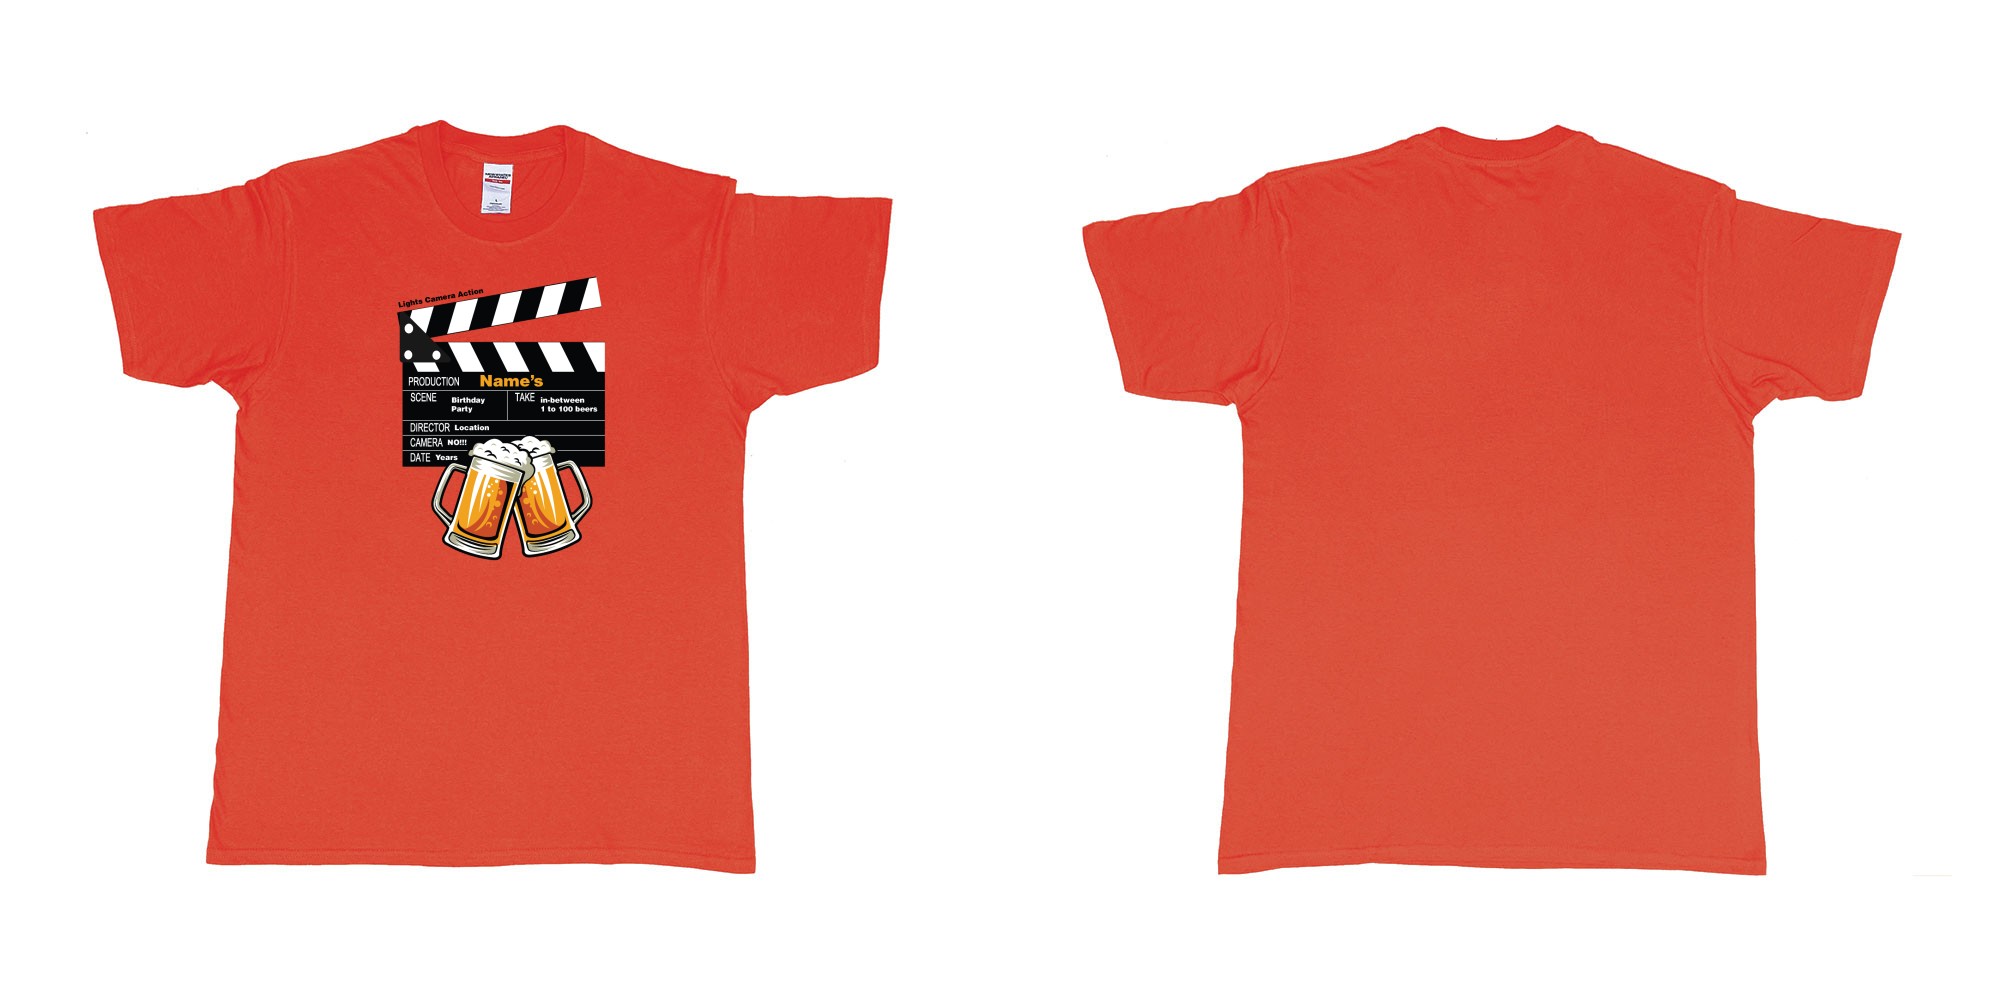 Custom tshirt design birthday beers movie clapperboard in fabric color red choice your own text made in Bali by The Pirate Way